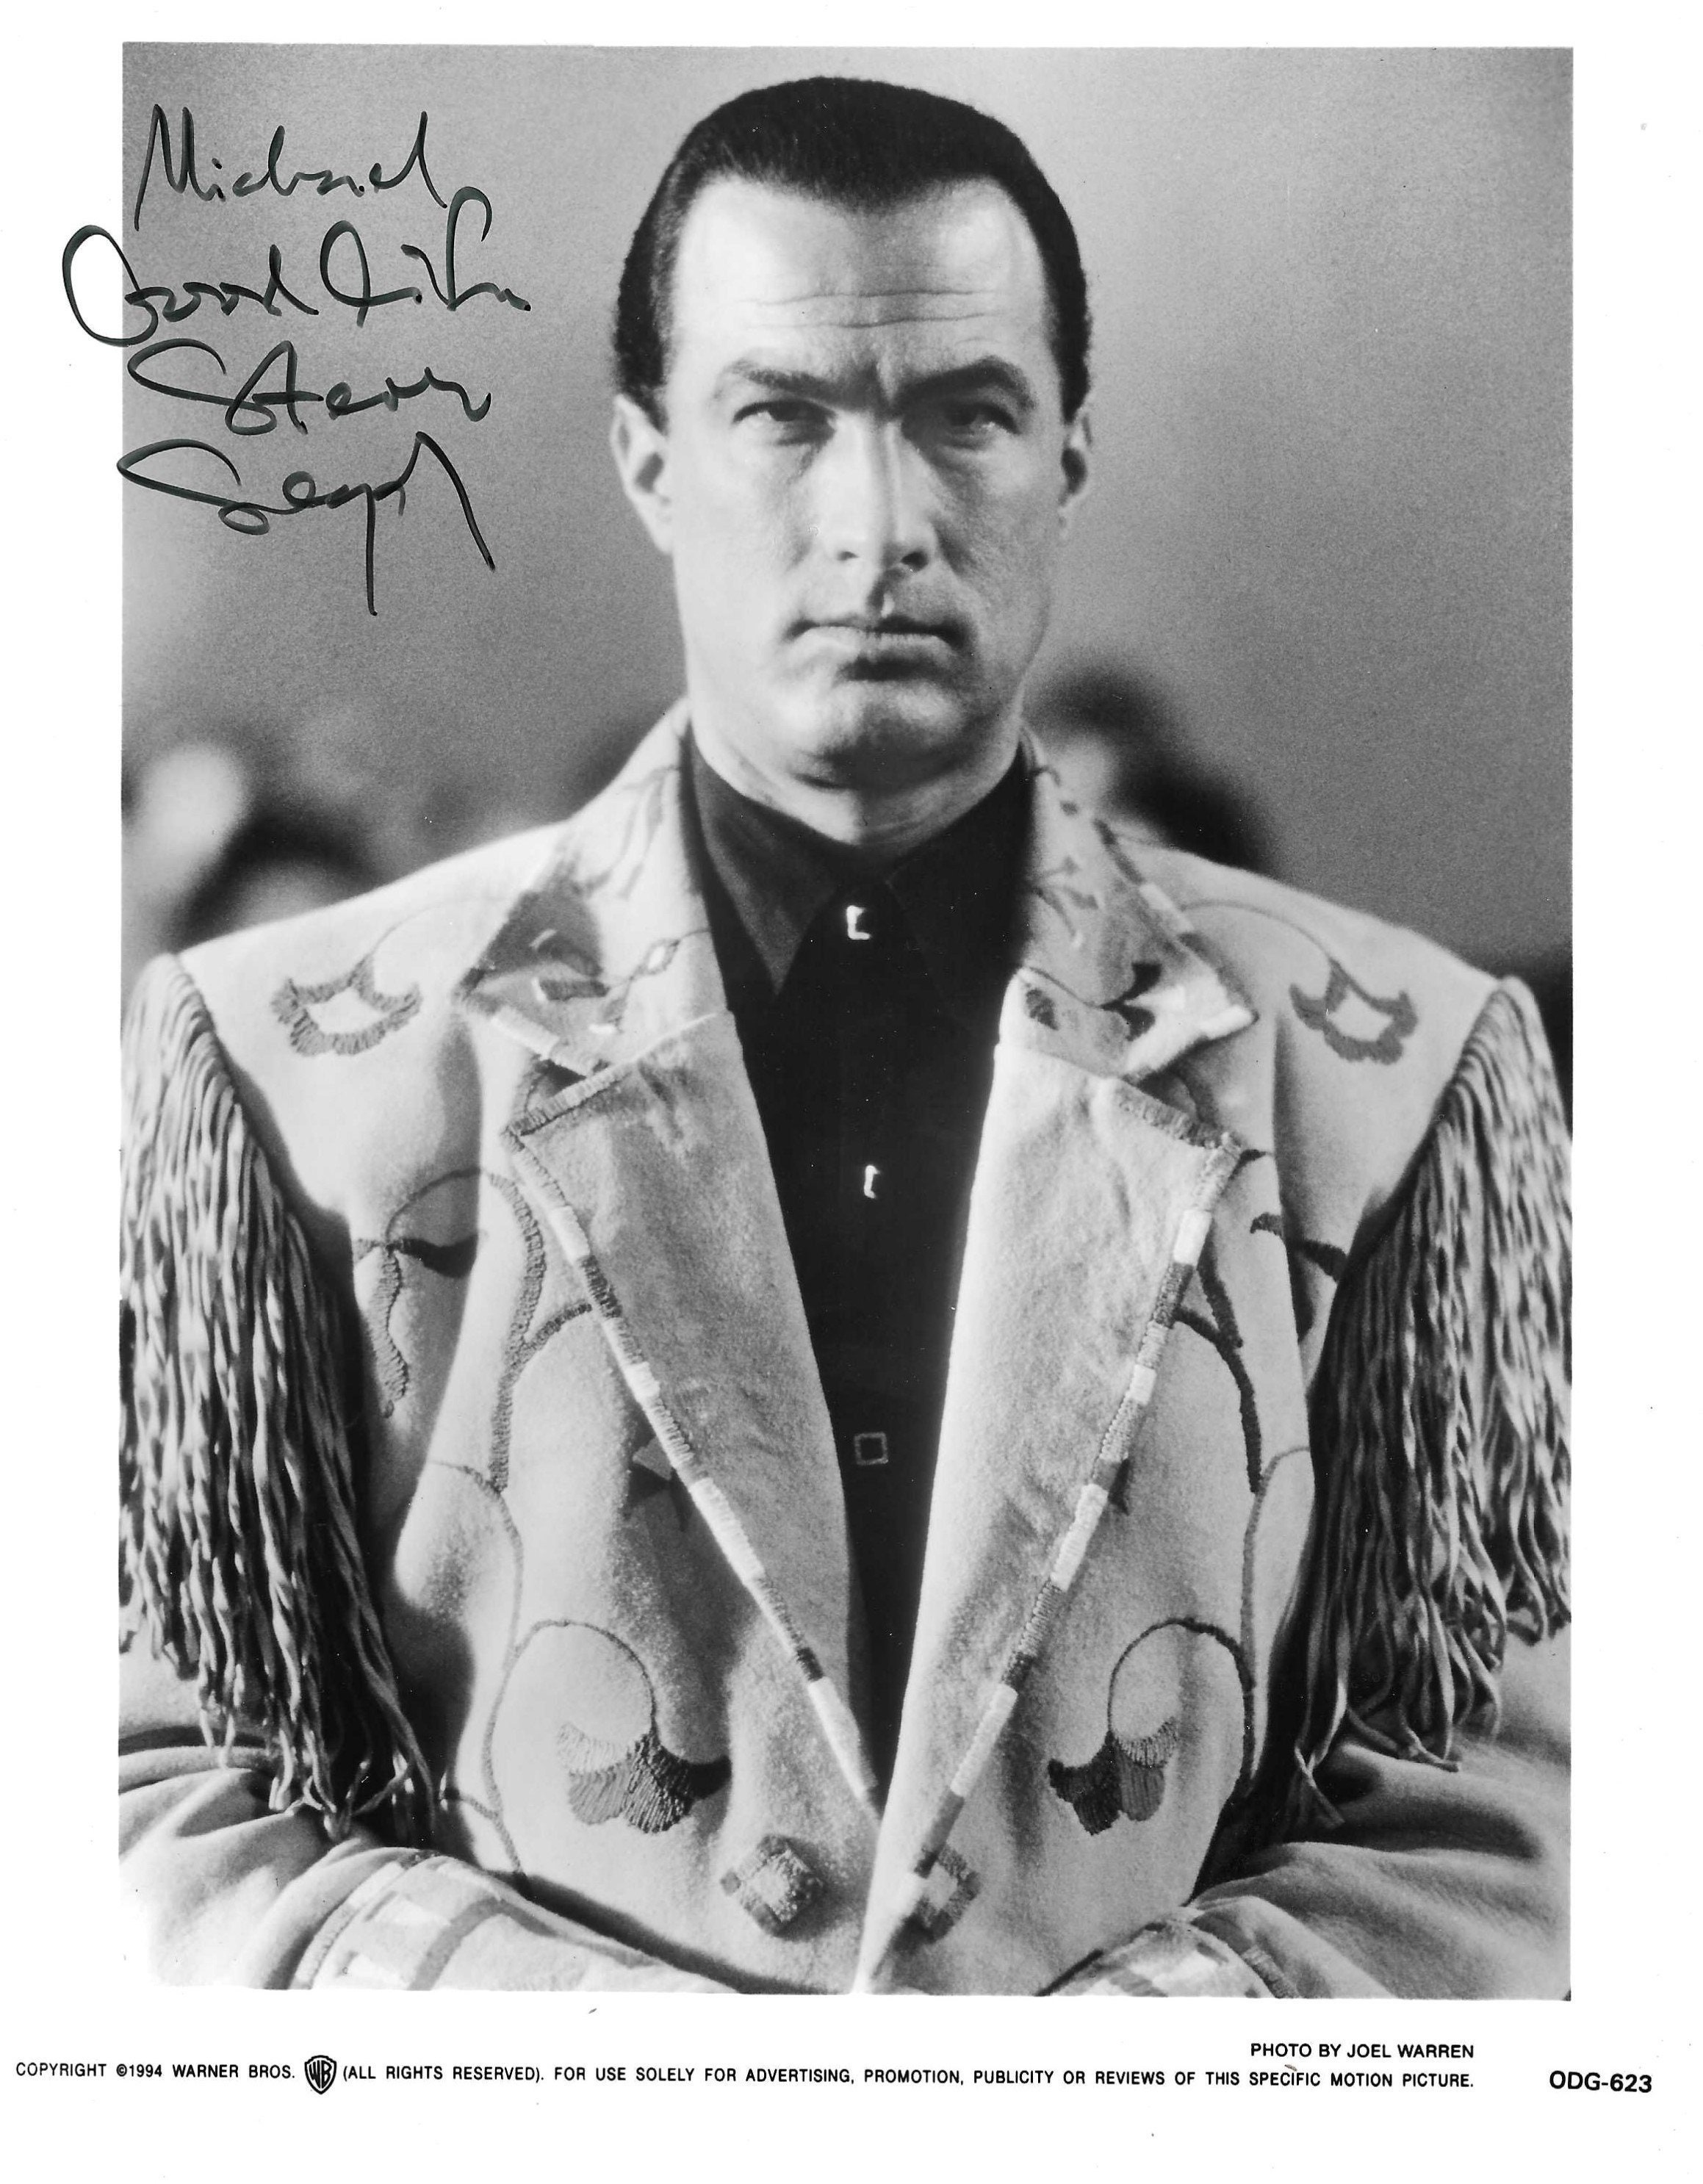 Steven Seagal under siege SIGNED AUTOGRAPHED 10" X 8" REPRODUCTION PHOTO PRINT 